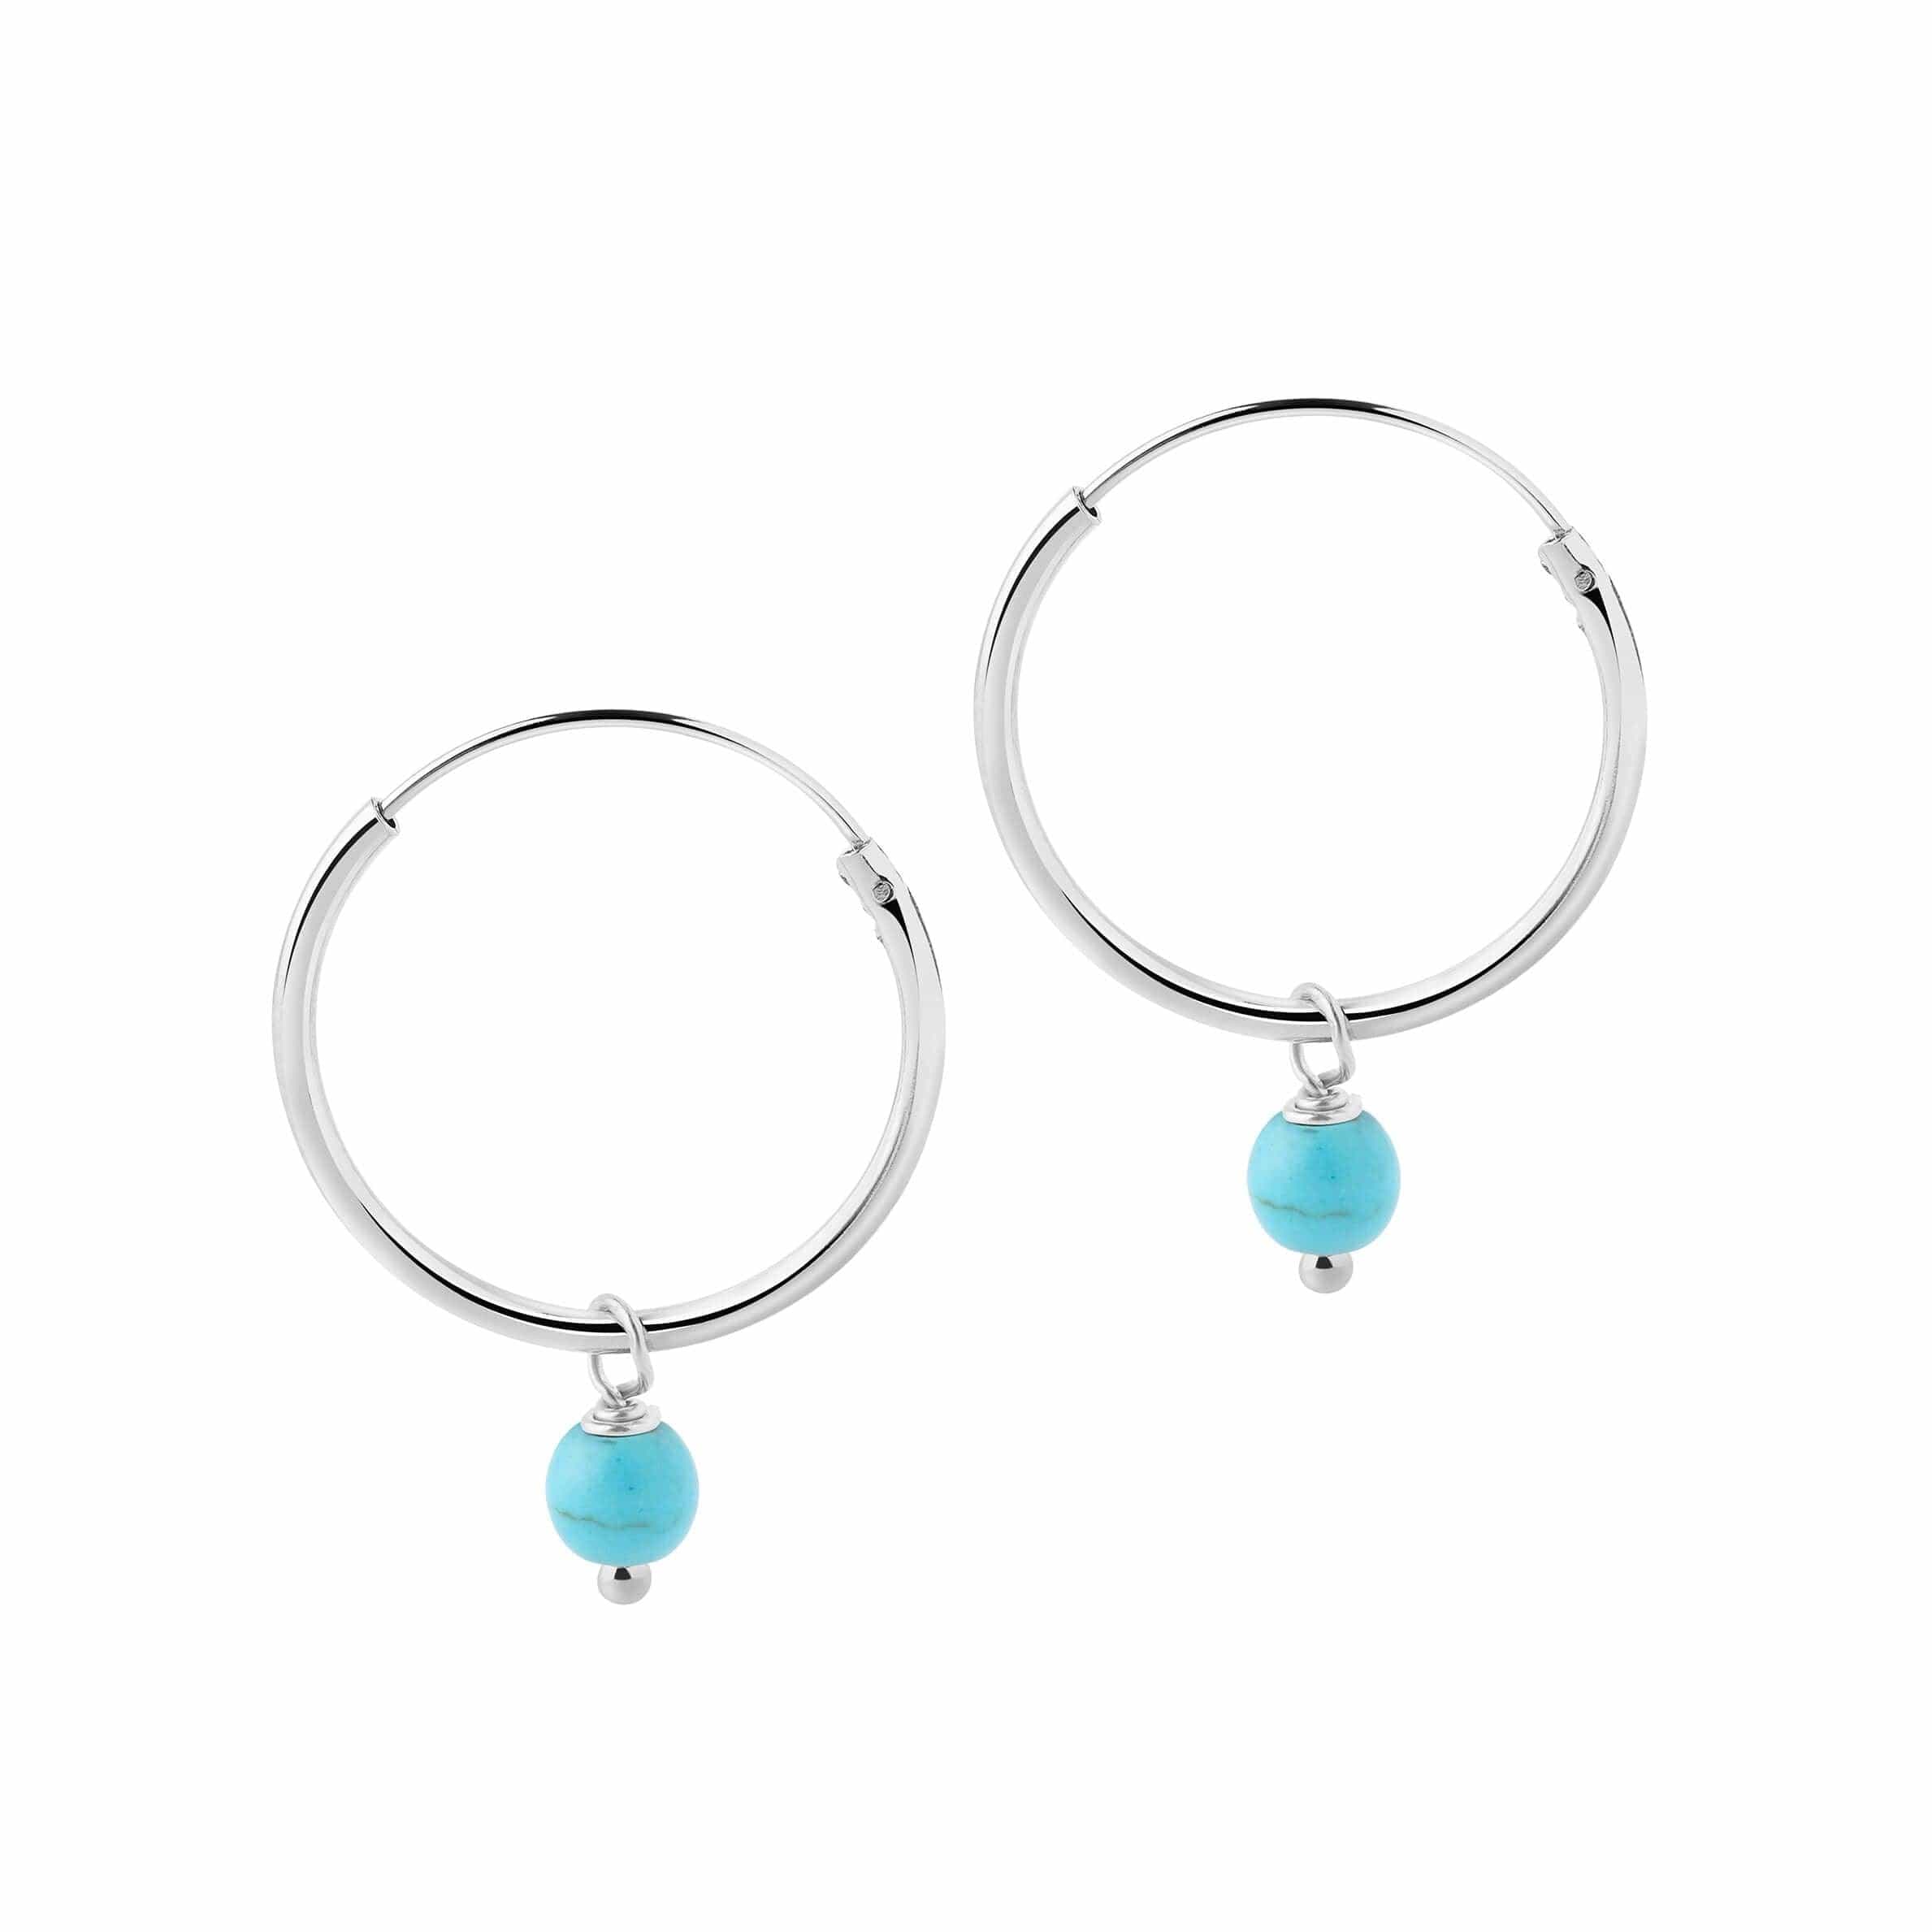 18mm Sliver Hoop Earrings with Turquoise Blue Stone